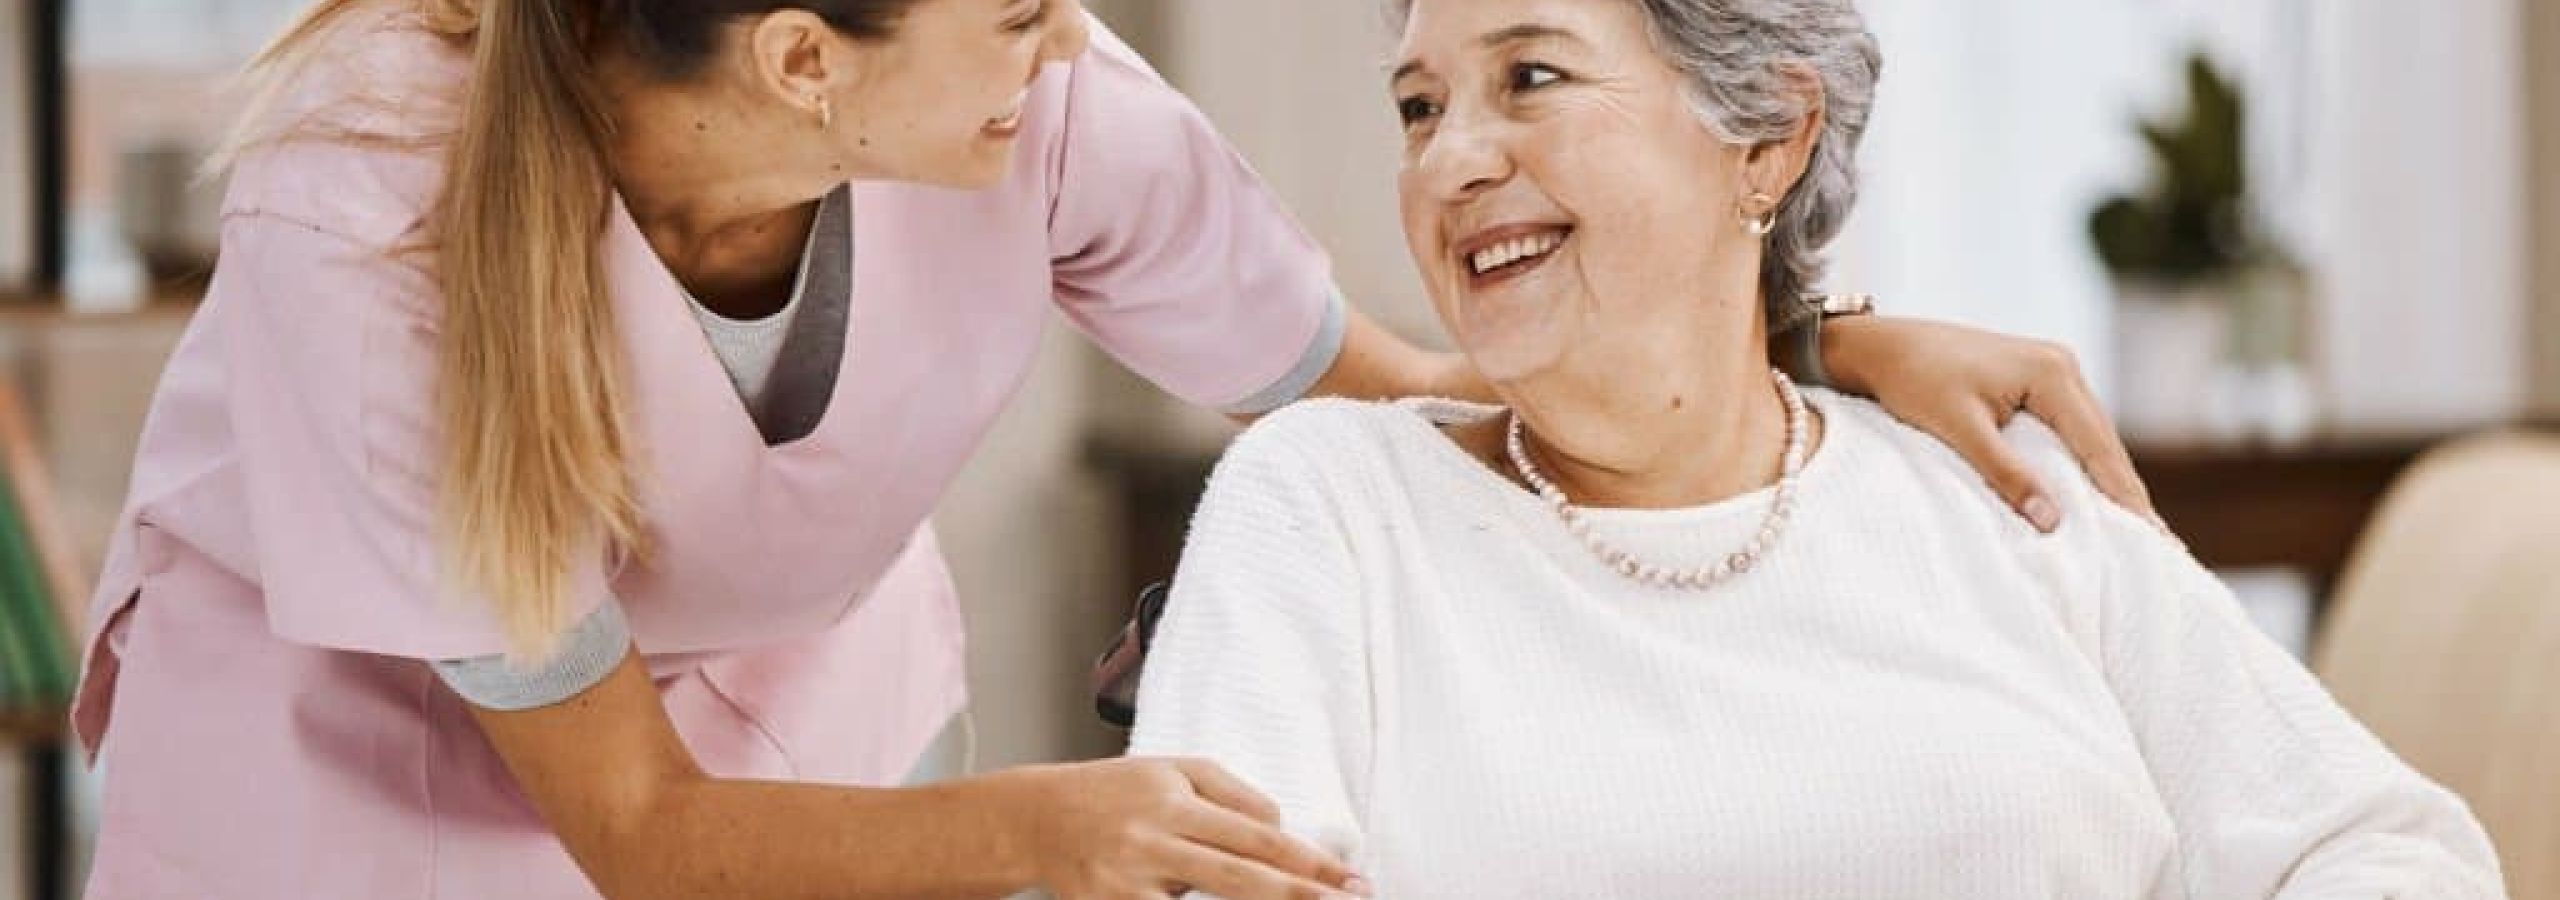 Managing Appointments with In-Home Care Support